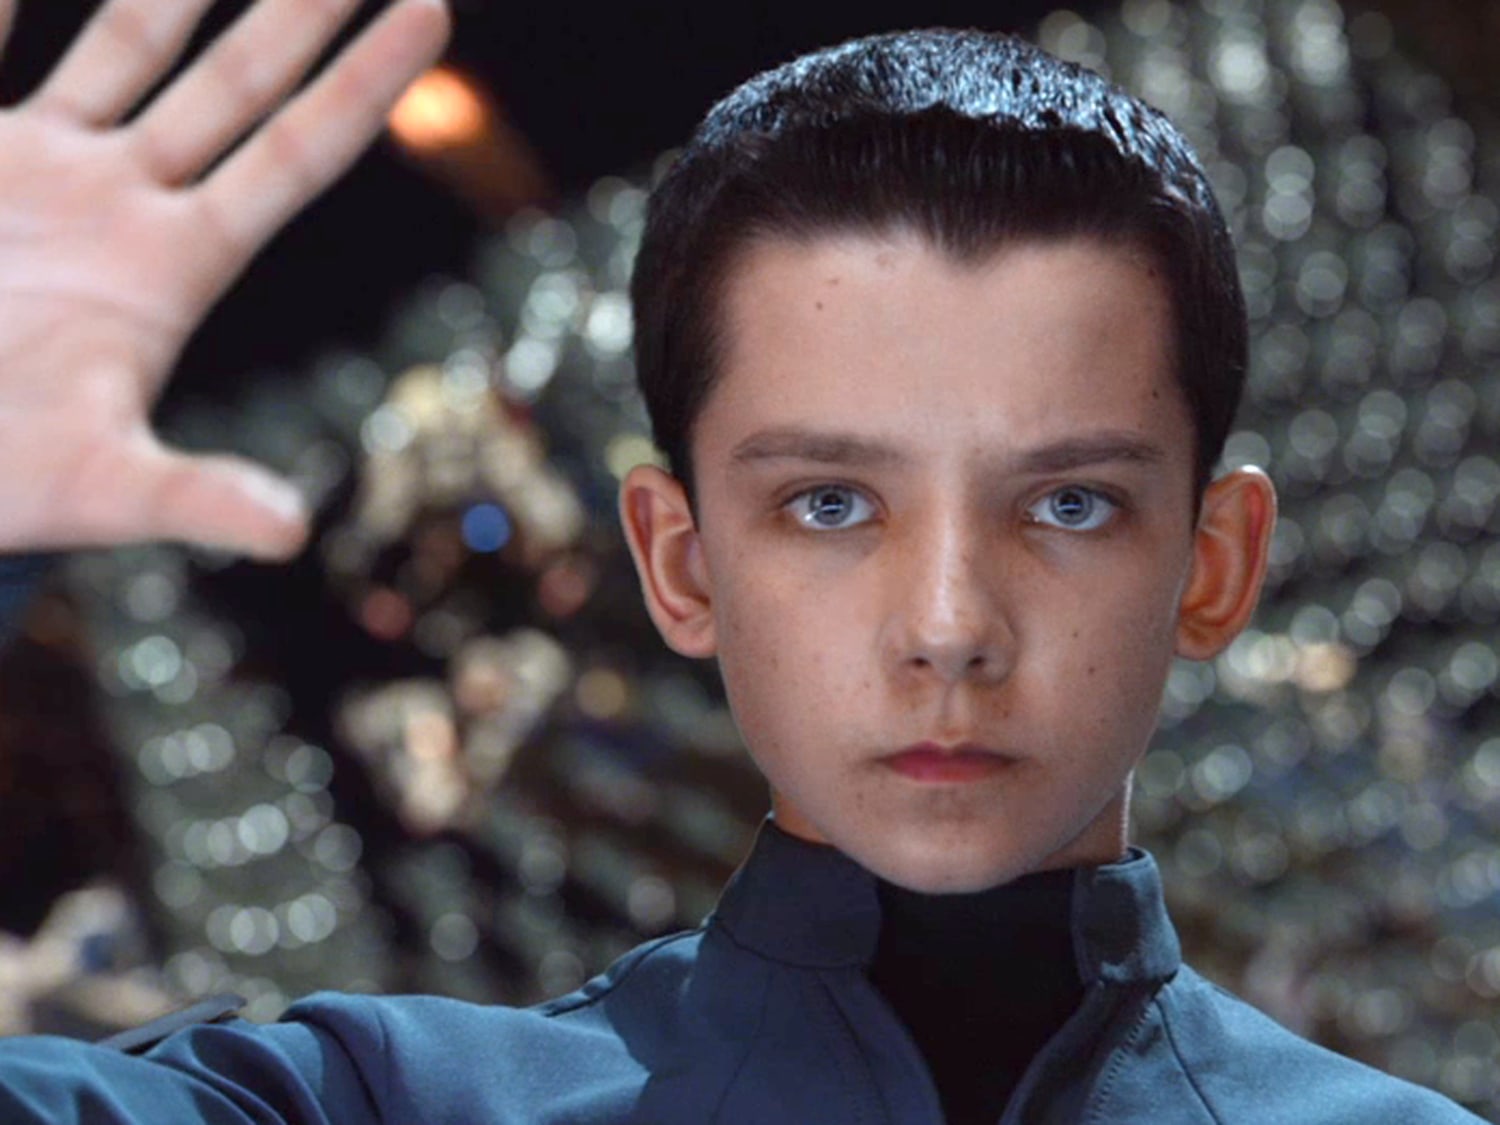 Review – Ender's Game